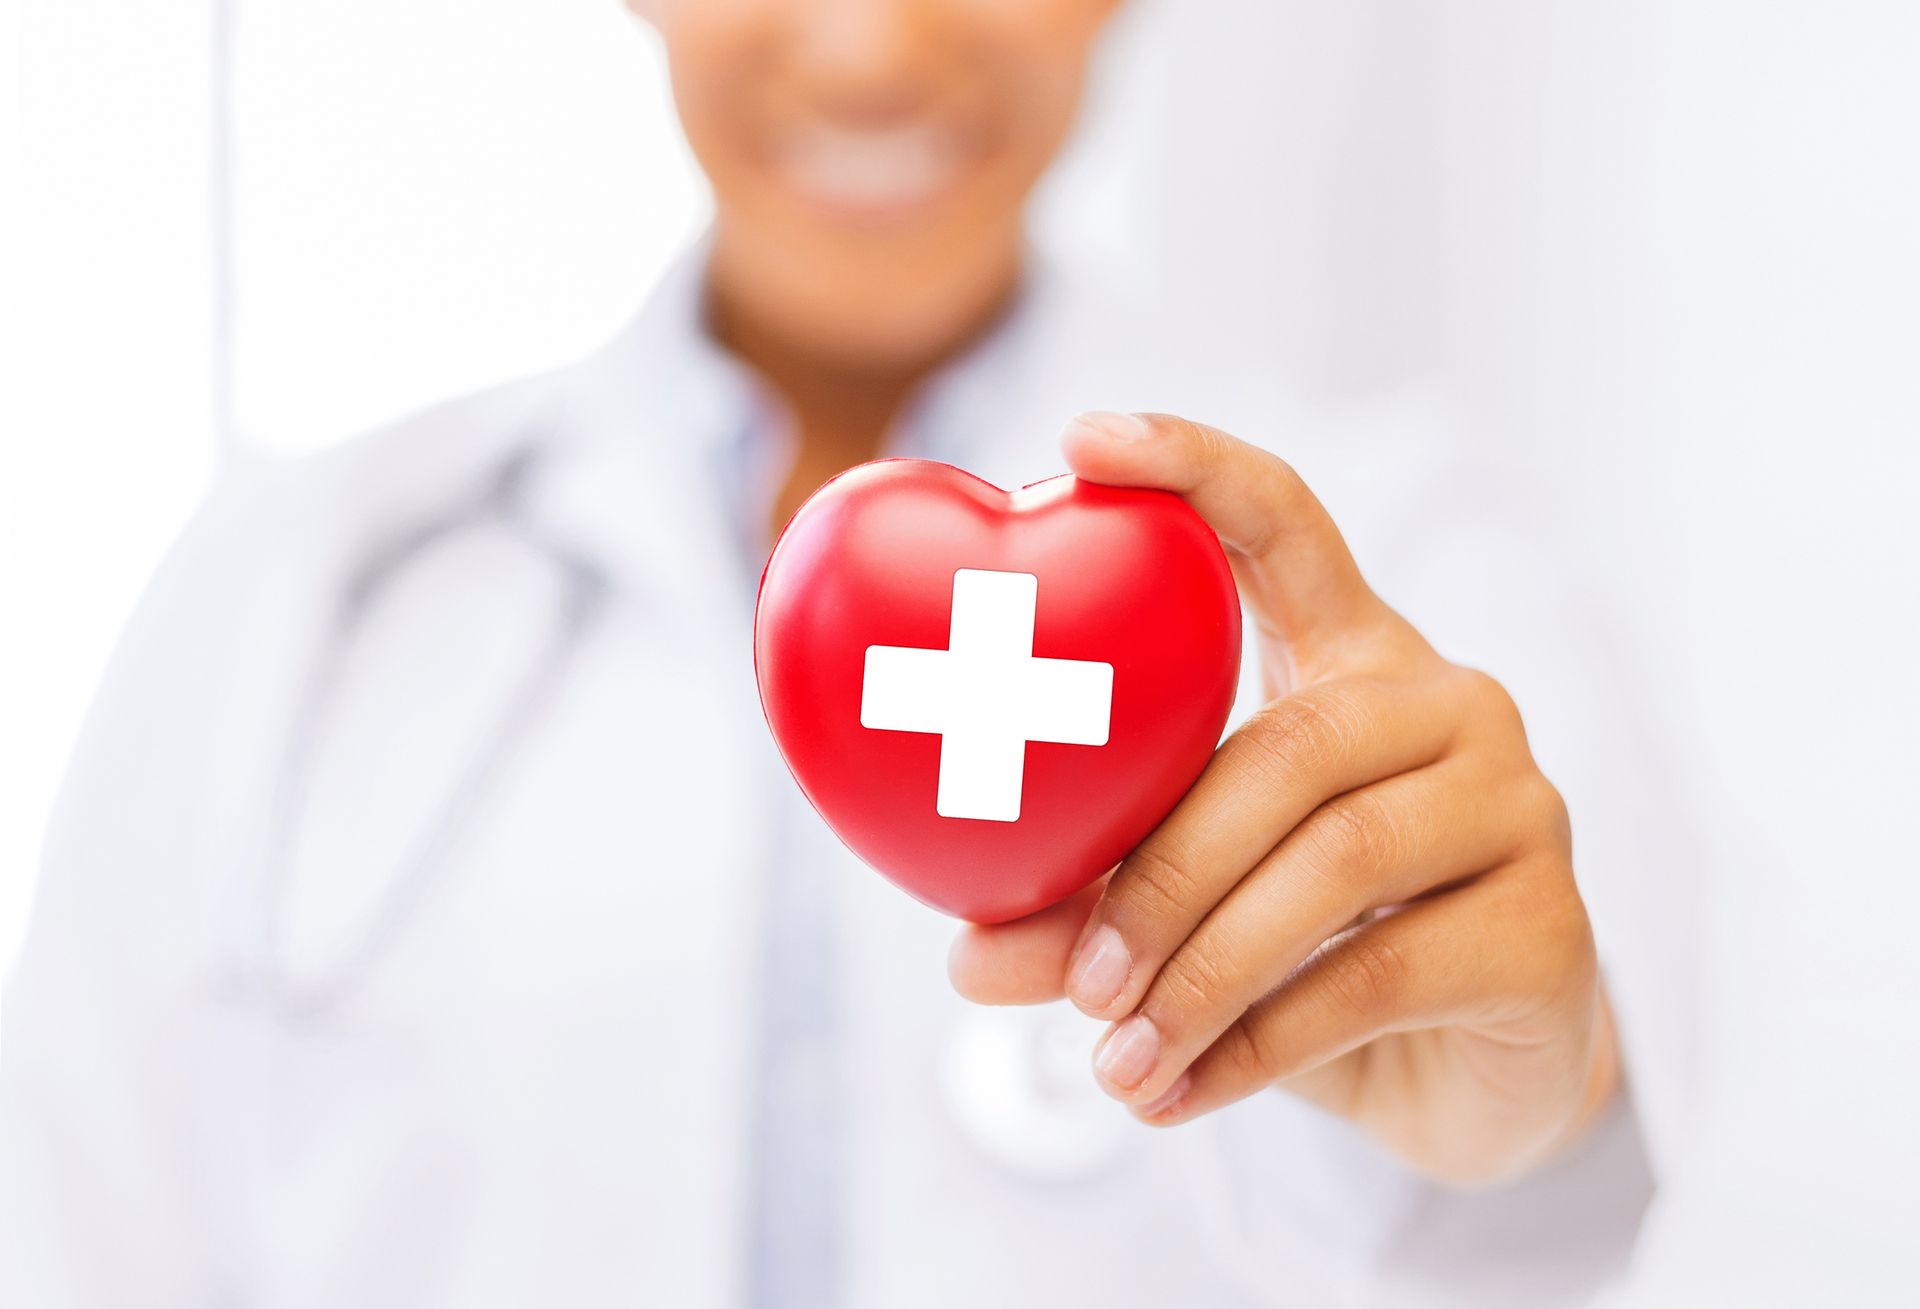 doctor holding a red cross symbol